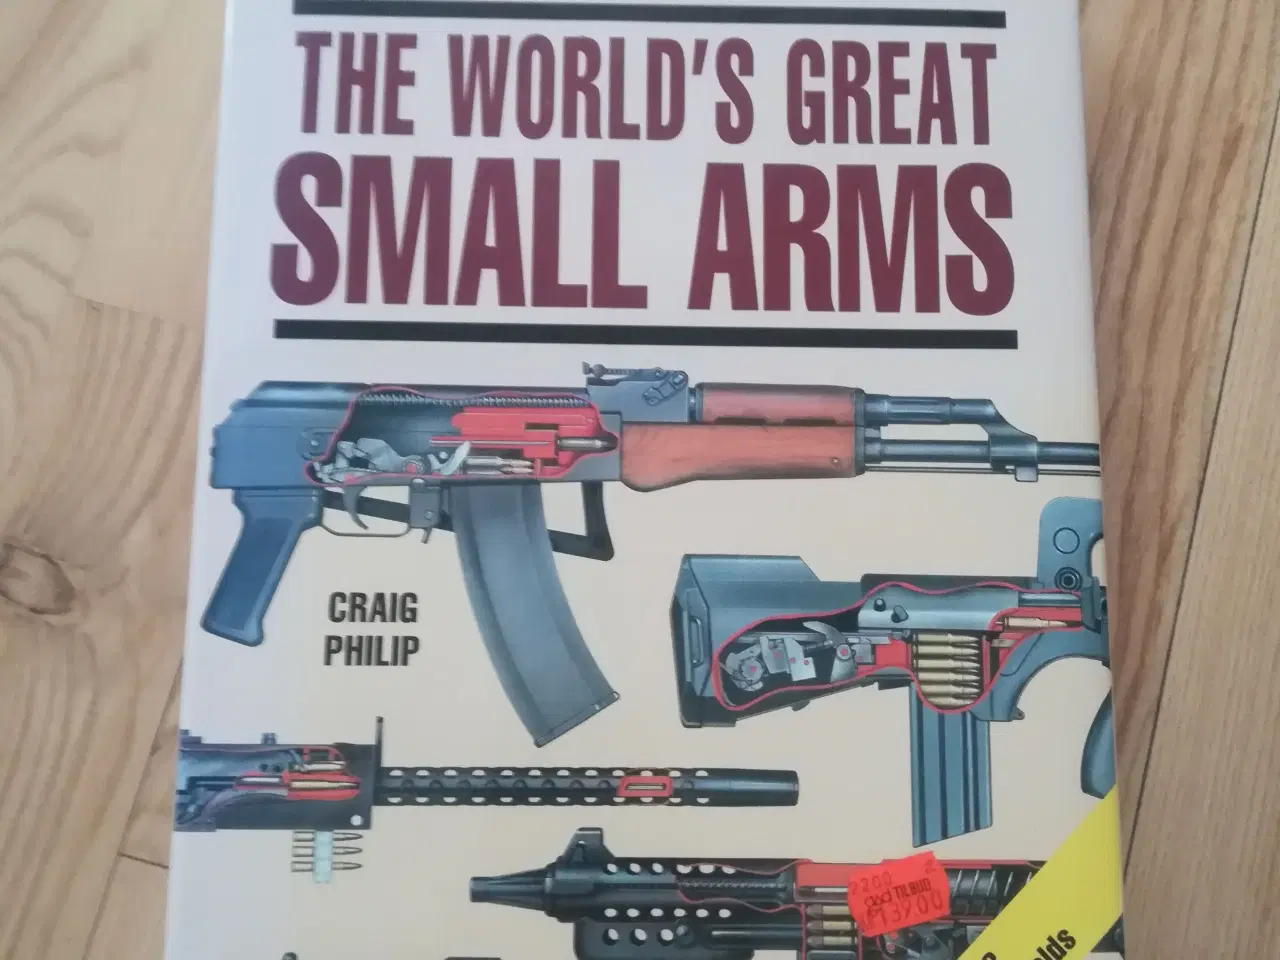 Billede 1 - The world's great small arms